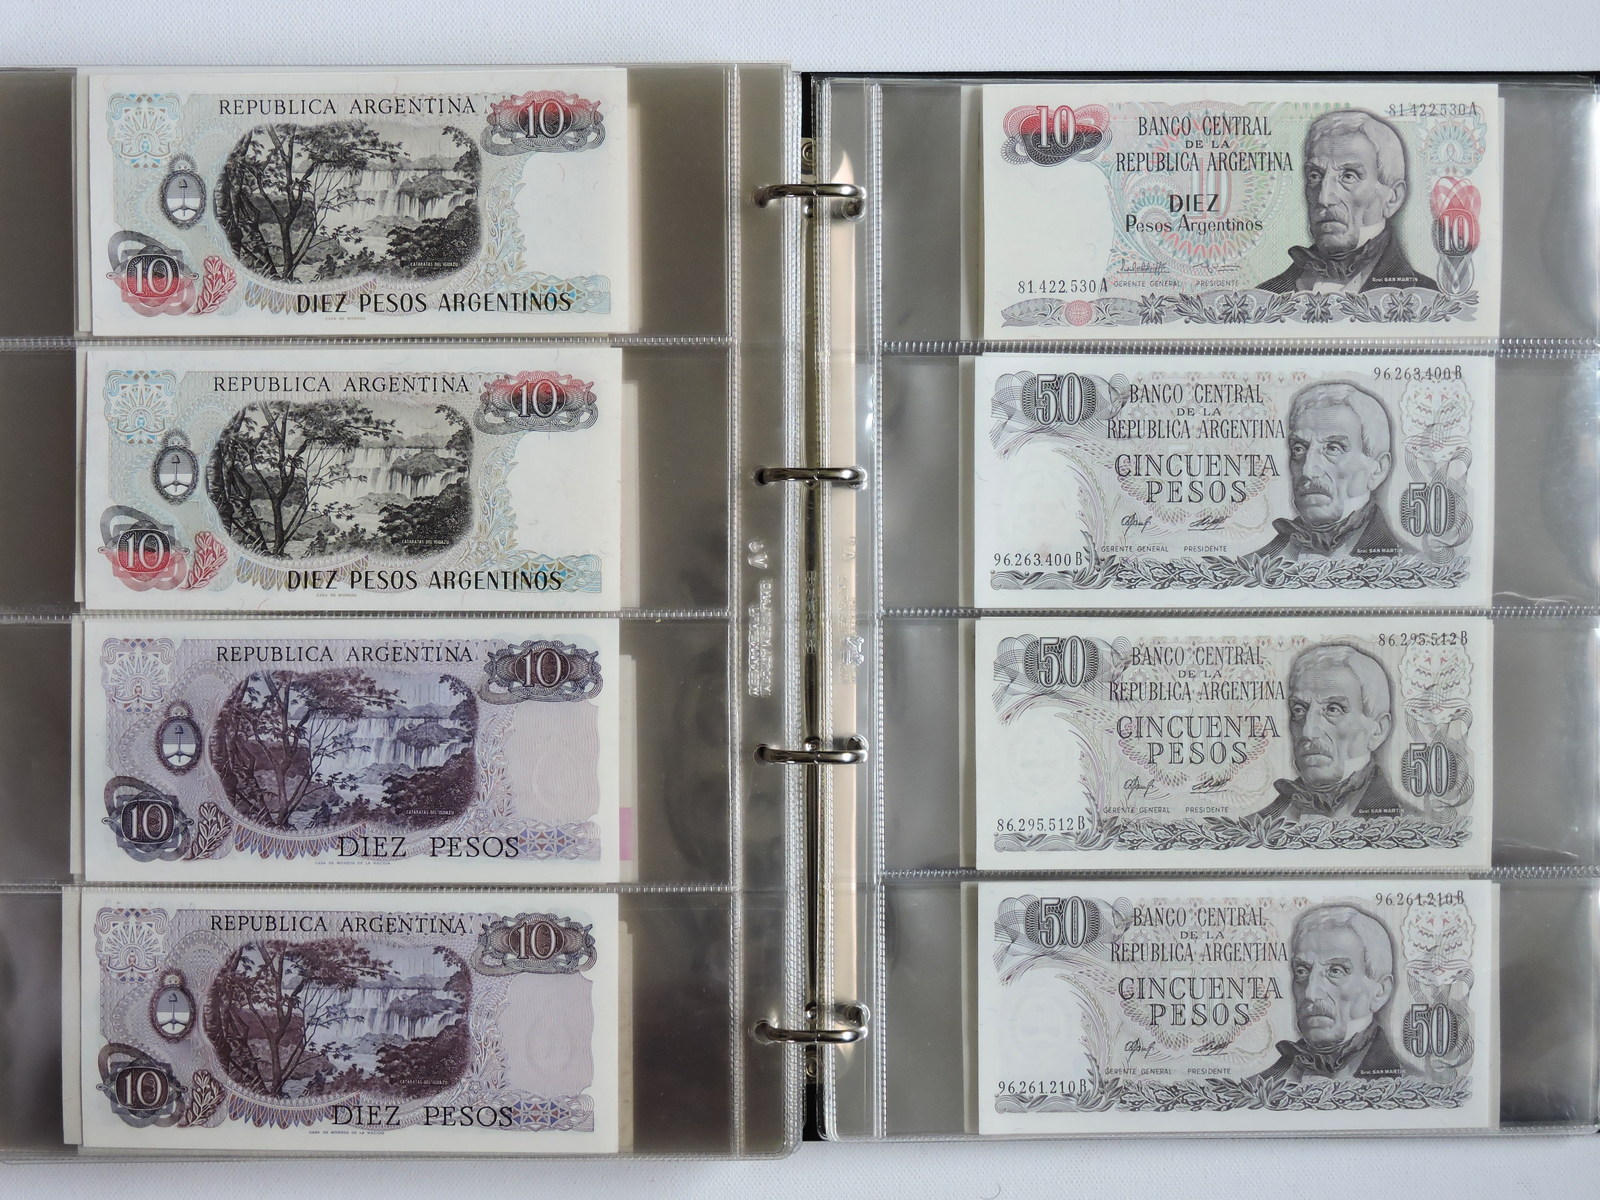 Banknotes, Brazil and Argentina
, page:36, item:1